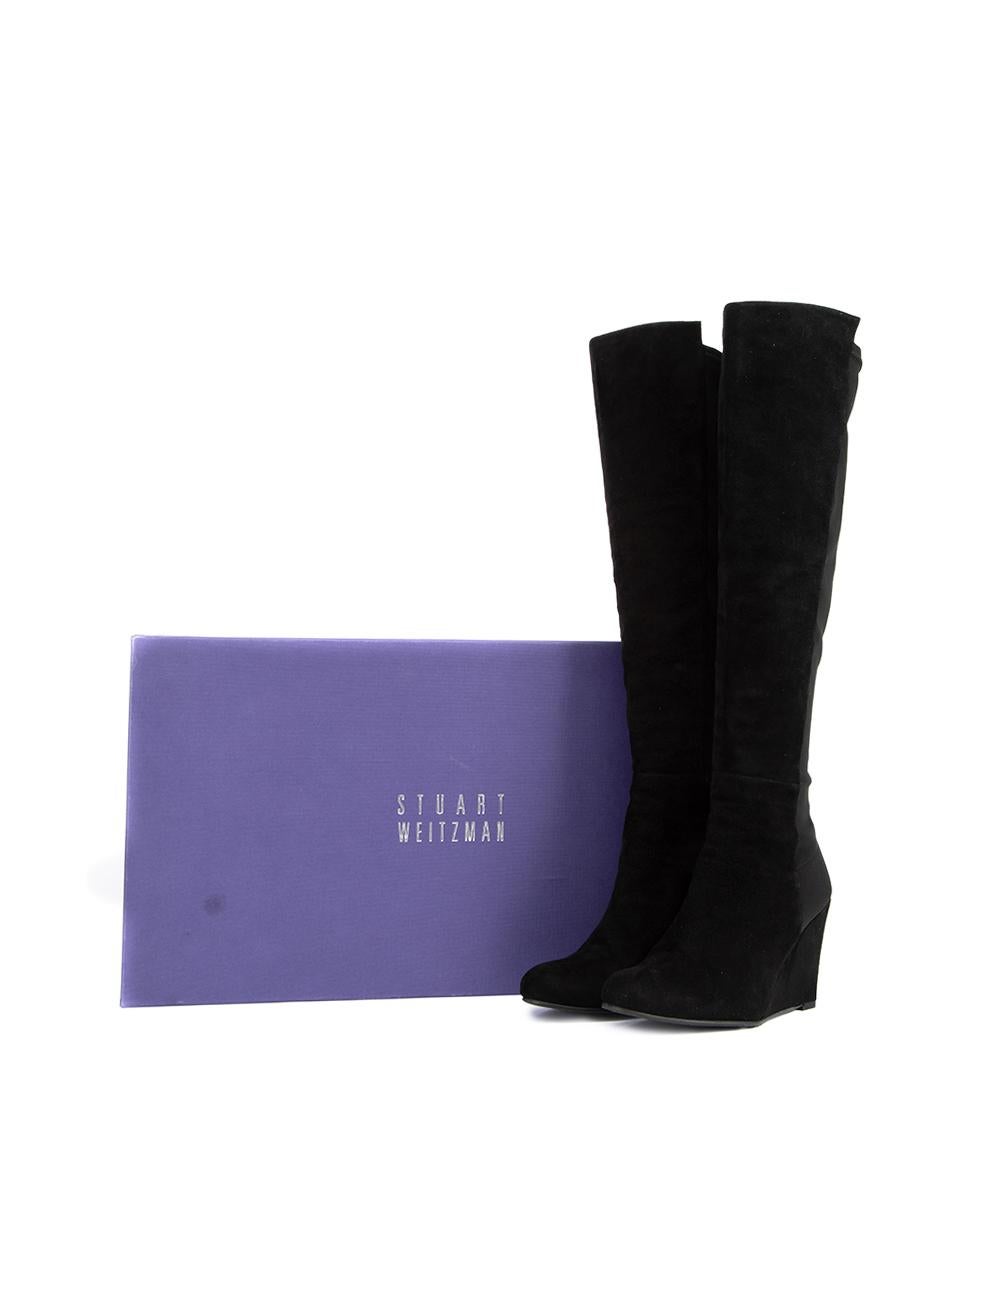 Stuart Weitzman x Russell Bromley Black Suede Wedge Knee Boots Size US 8.5 1